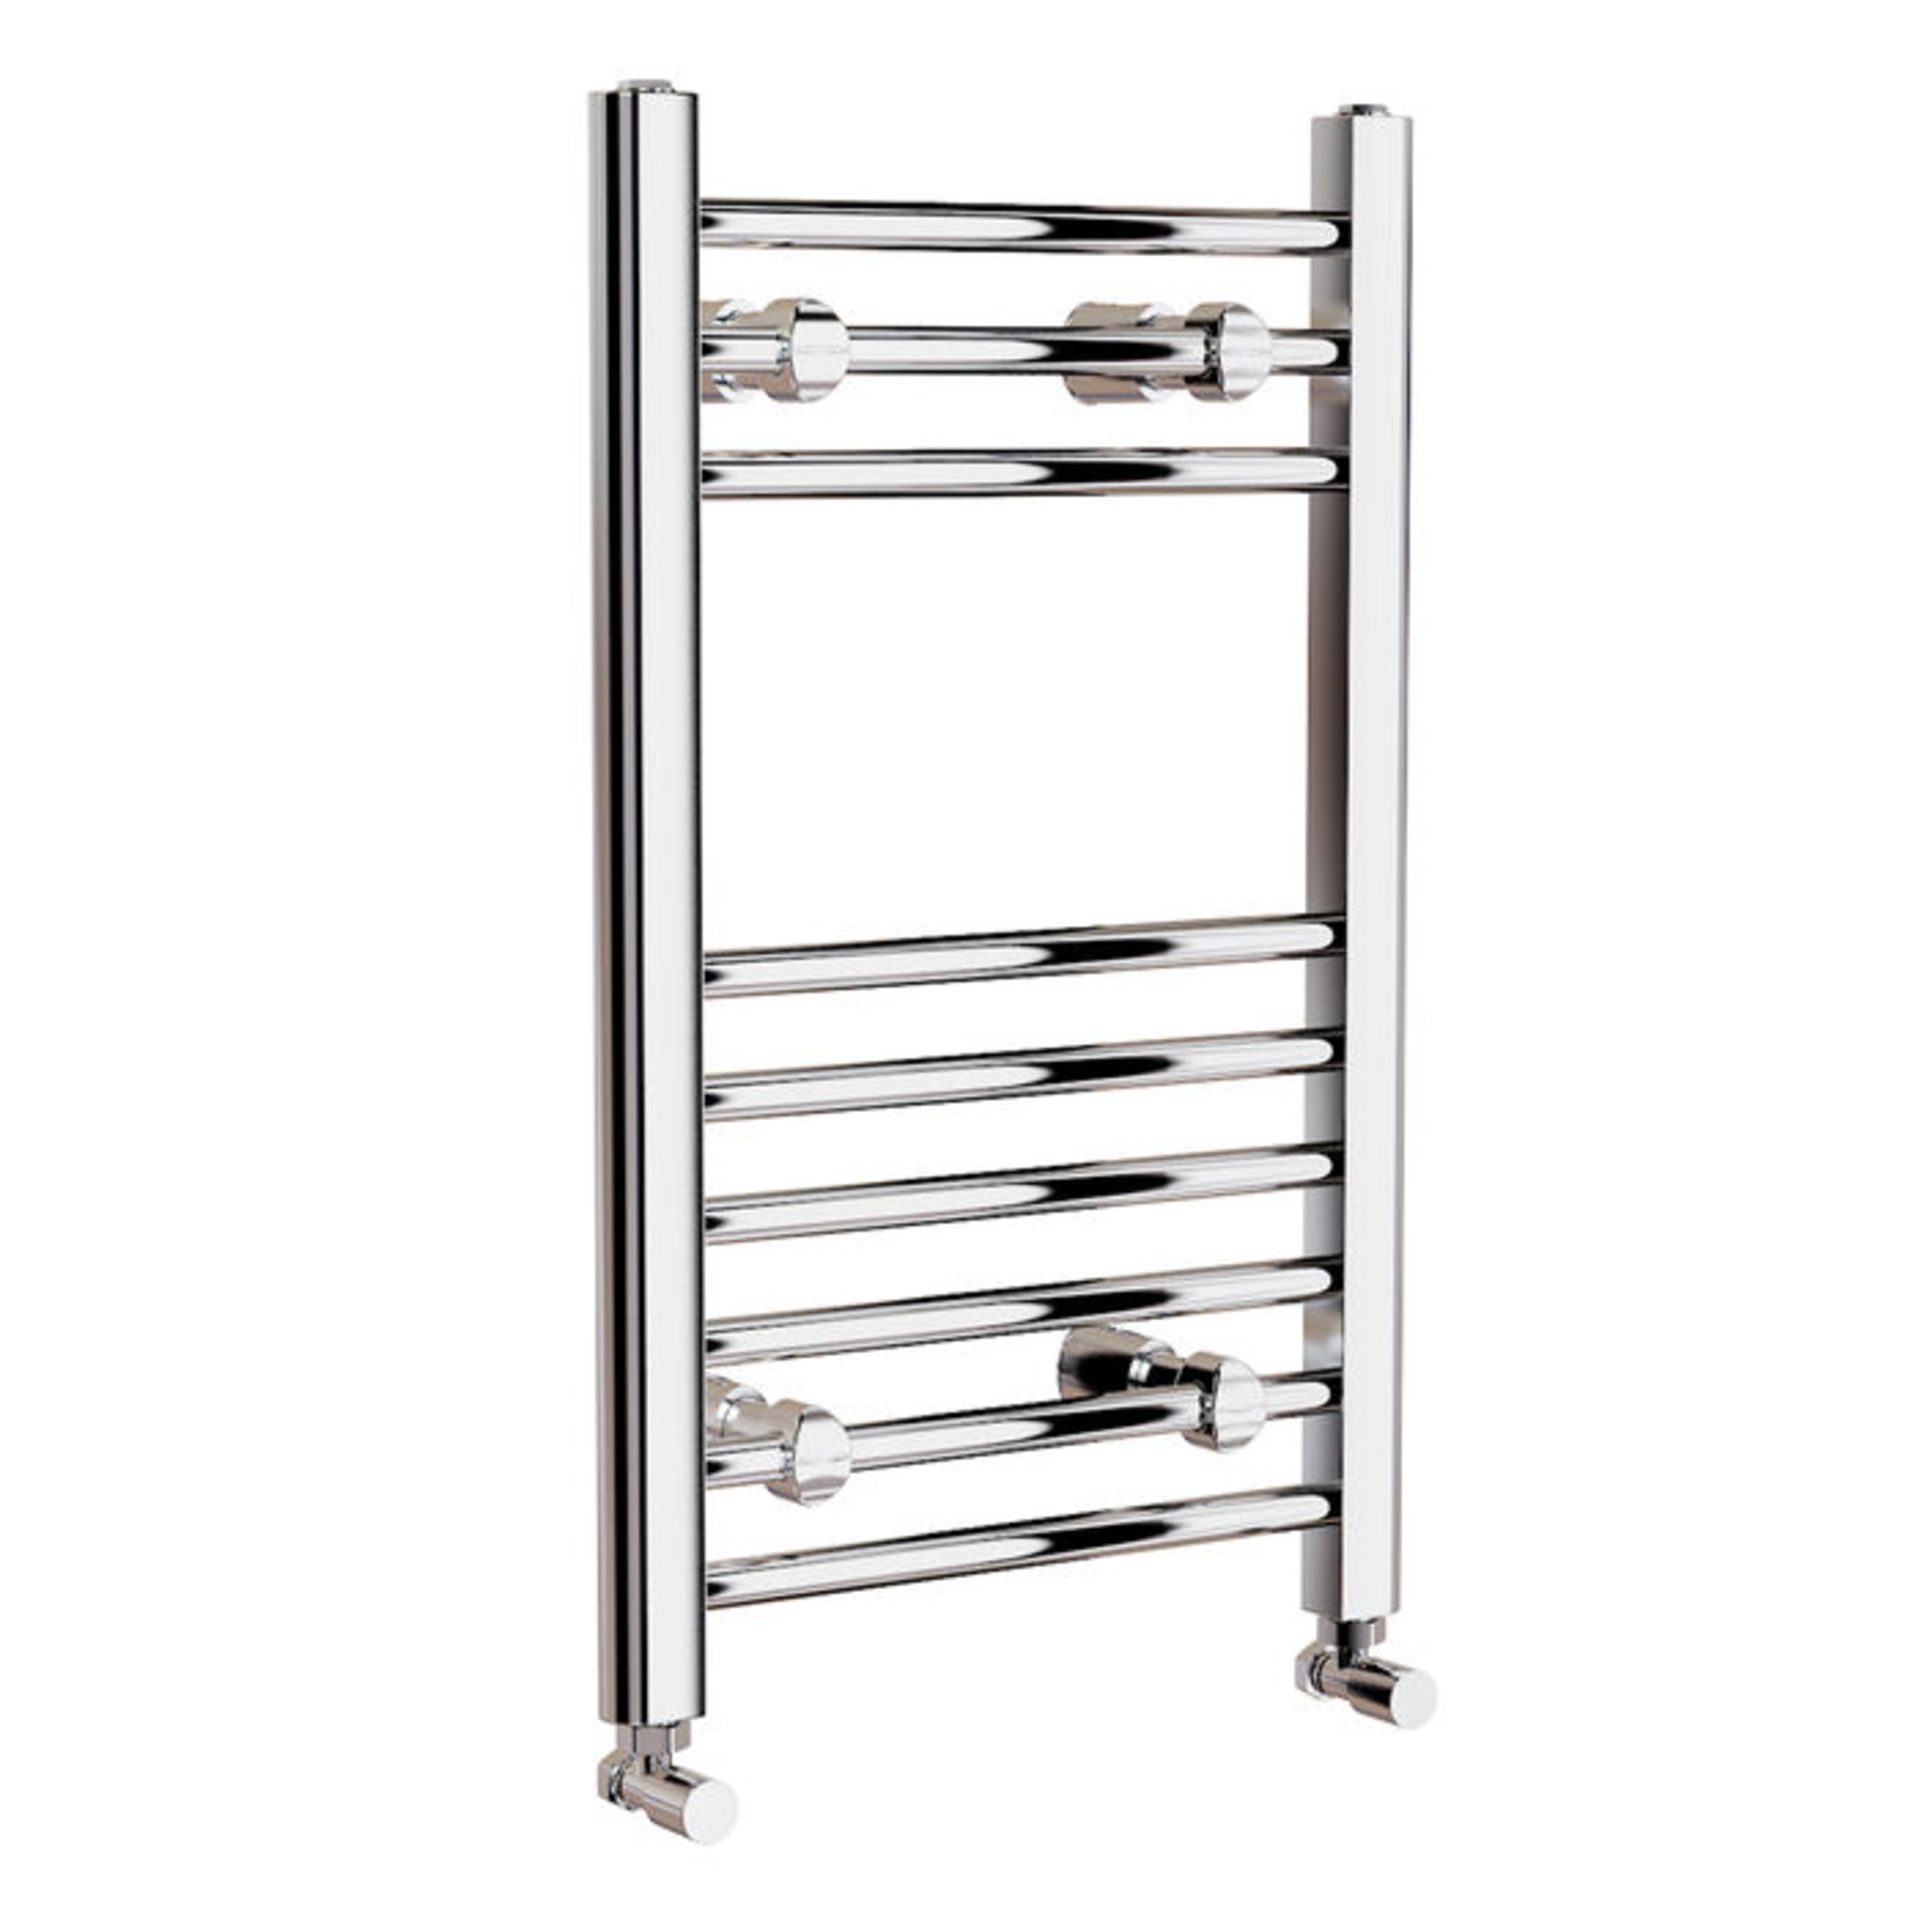 (G145) 650x400mm Straight Heated Towel Radiator. Low carbon steel chrome plated radiator. This...